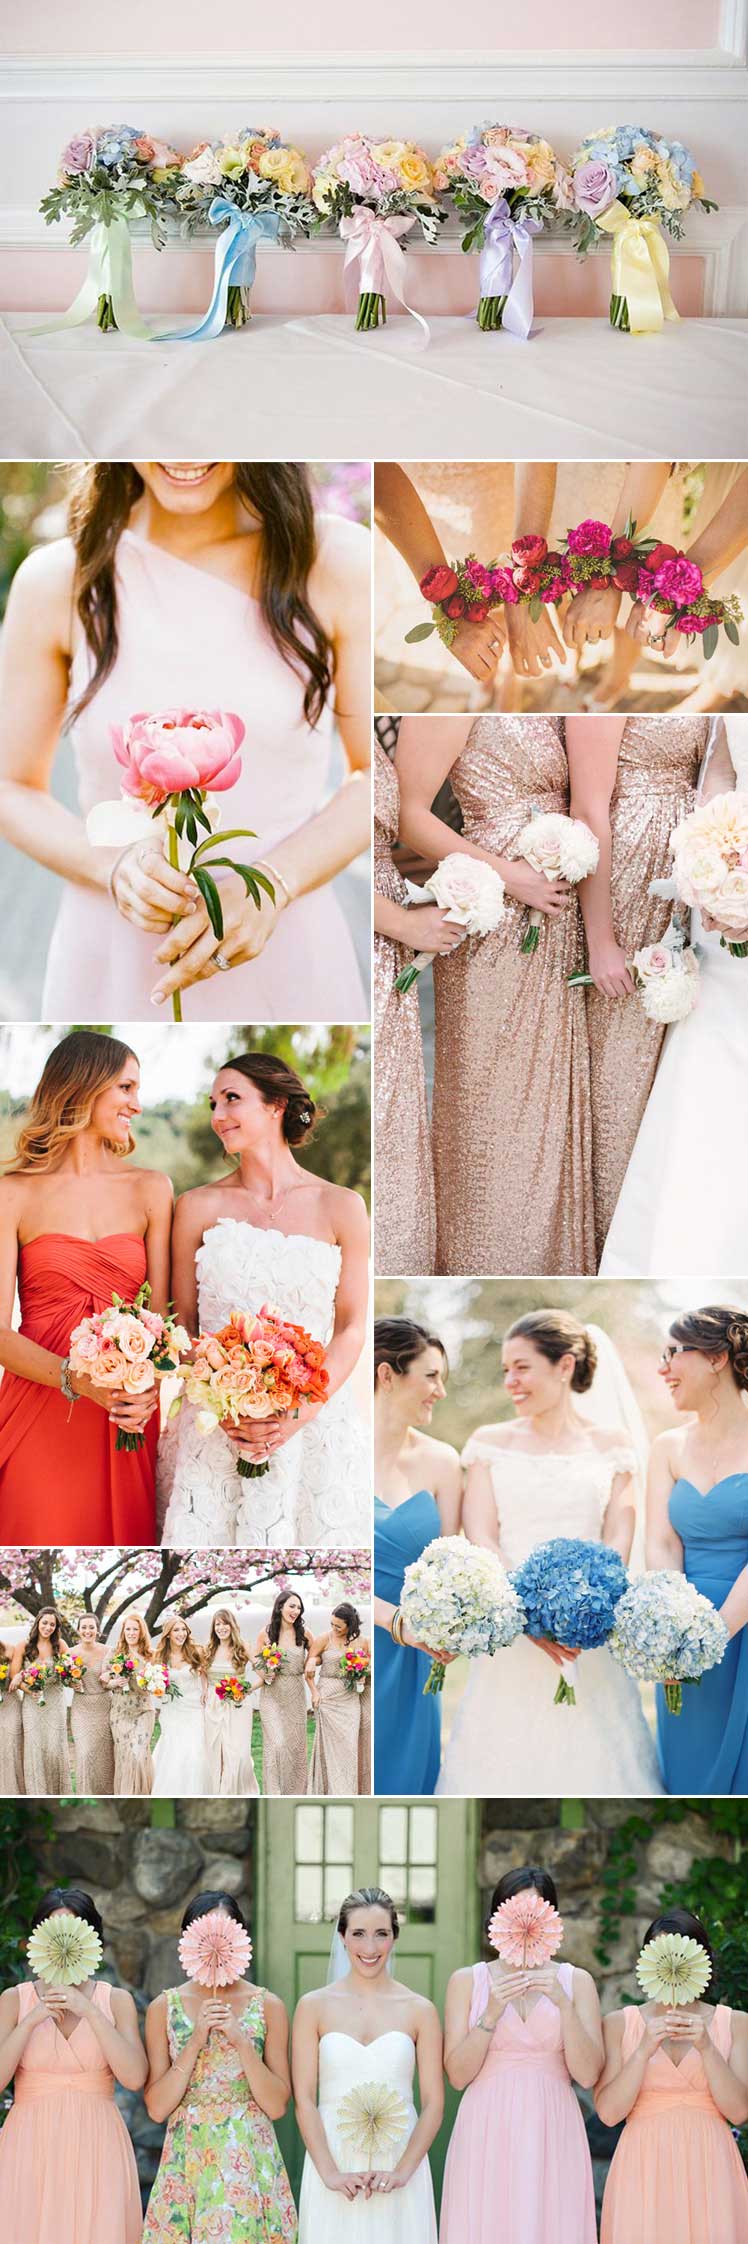 Posy ideas for your bridesmaids